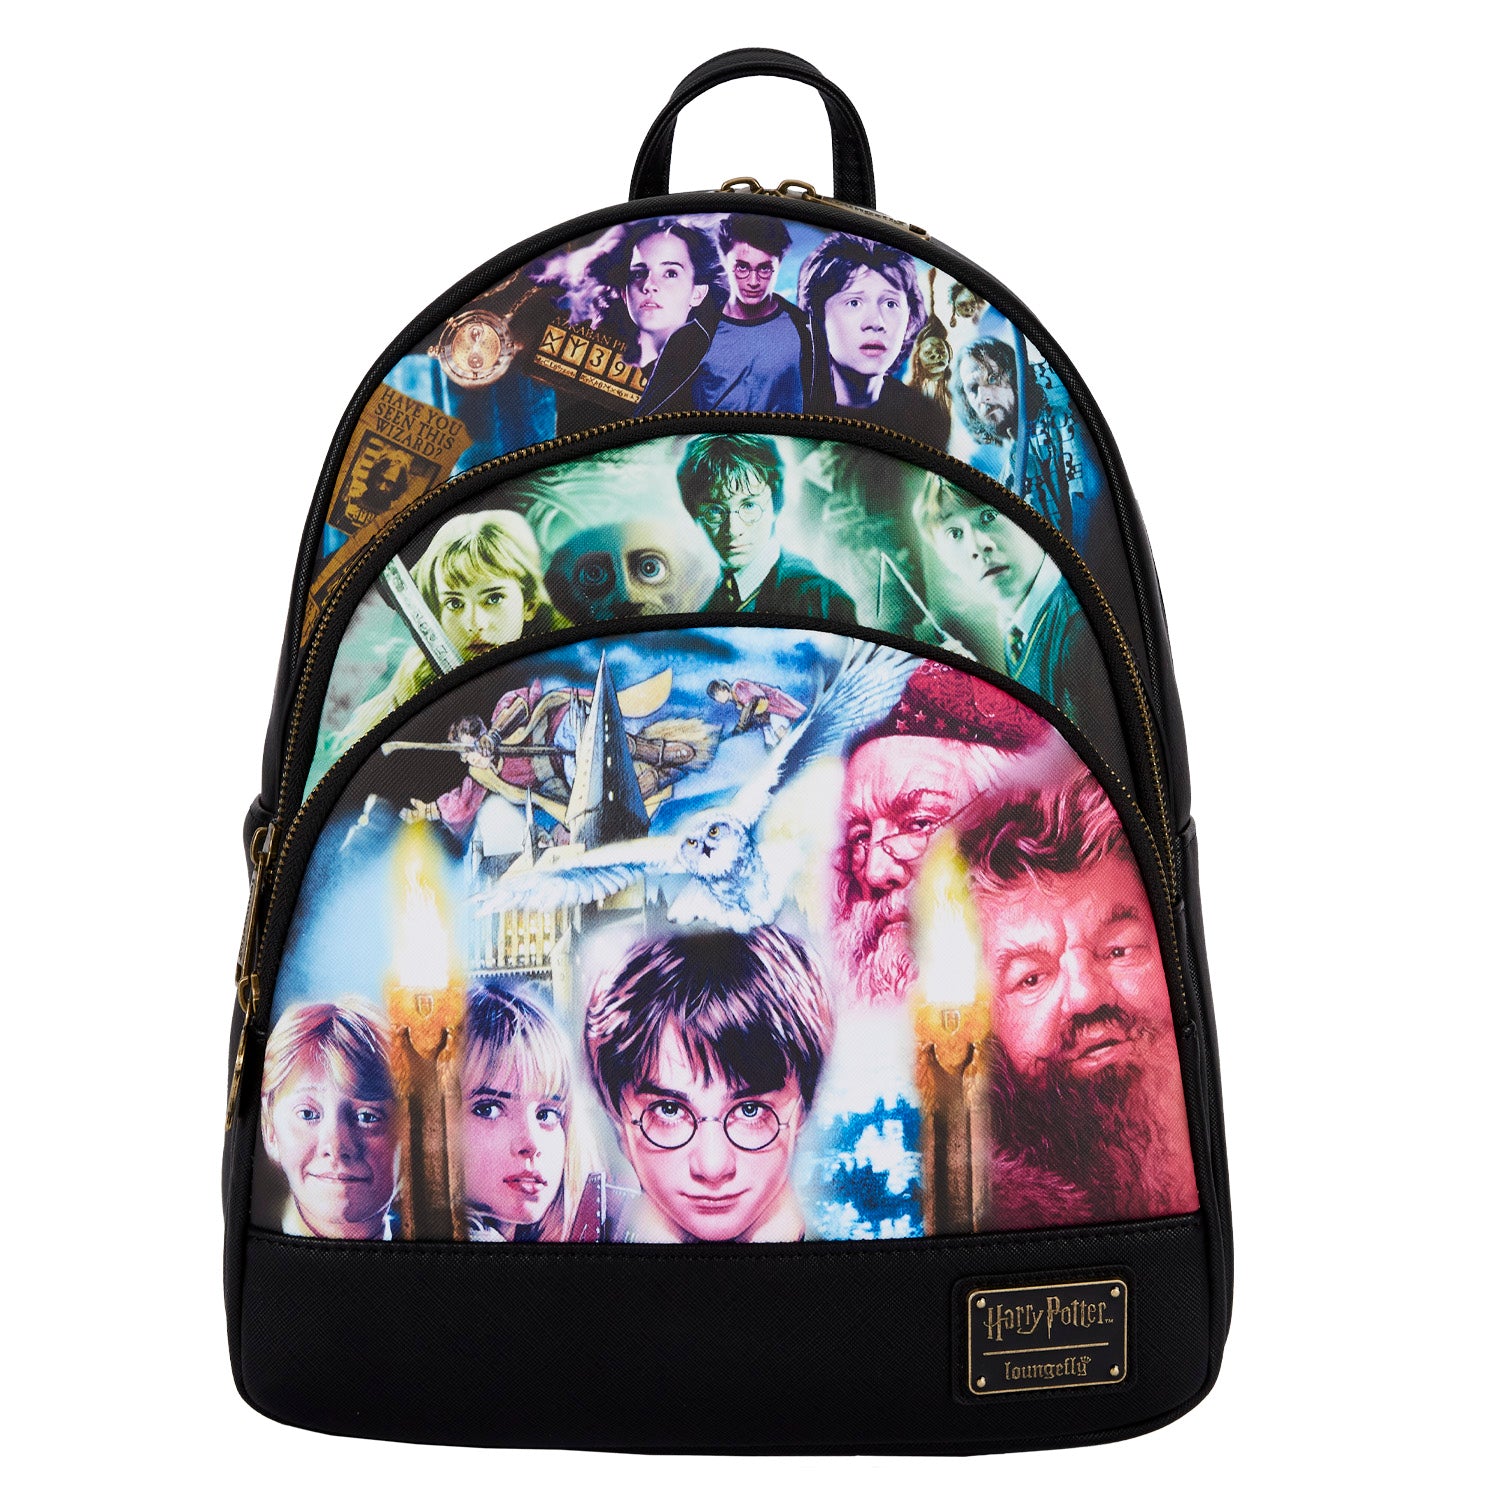 Buy Harry Potter Diagon Alley Sequin Mini Backpack at Loungefly.